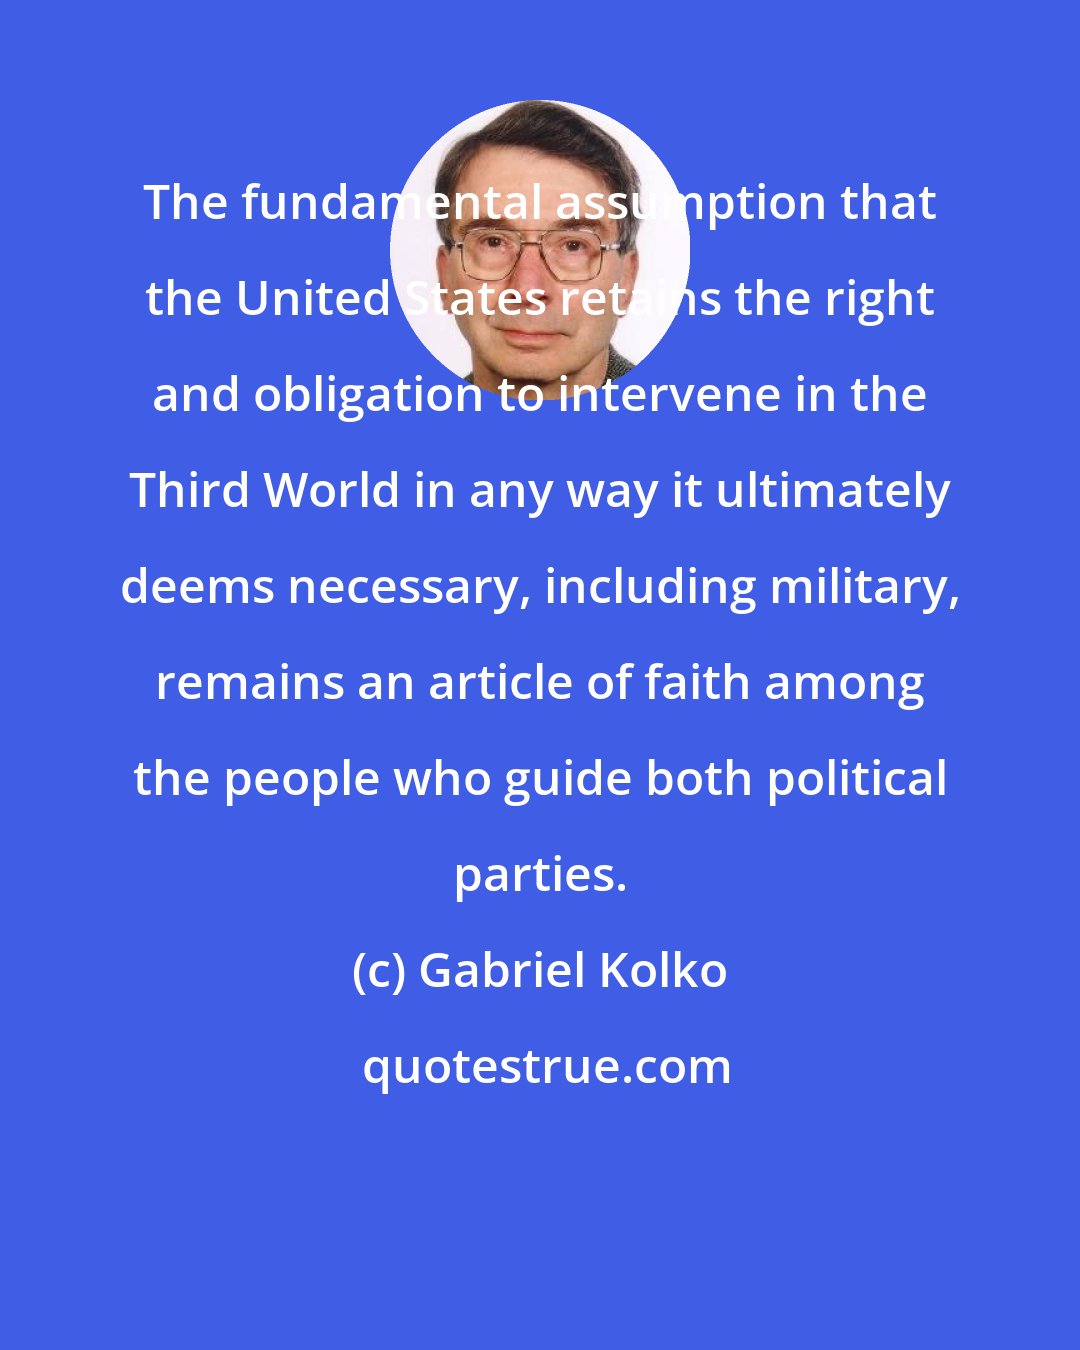 Gabriel Kolko: The fundamental assumption that the United States retains the right and obligation to intervene in the Third World in any way it ultimately deems necessary, including military, remains an article of faith among the people who guide both political parties.